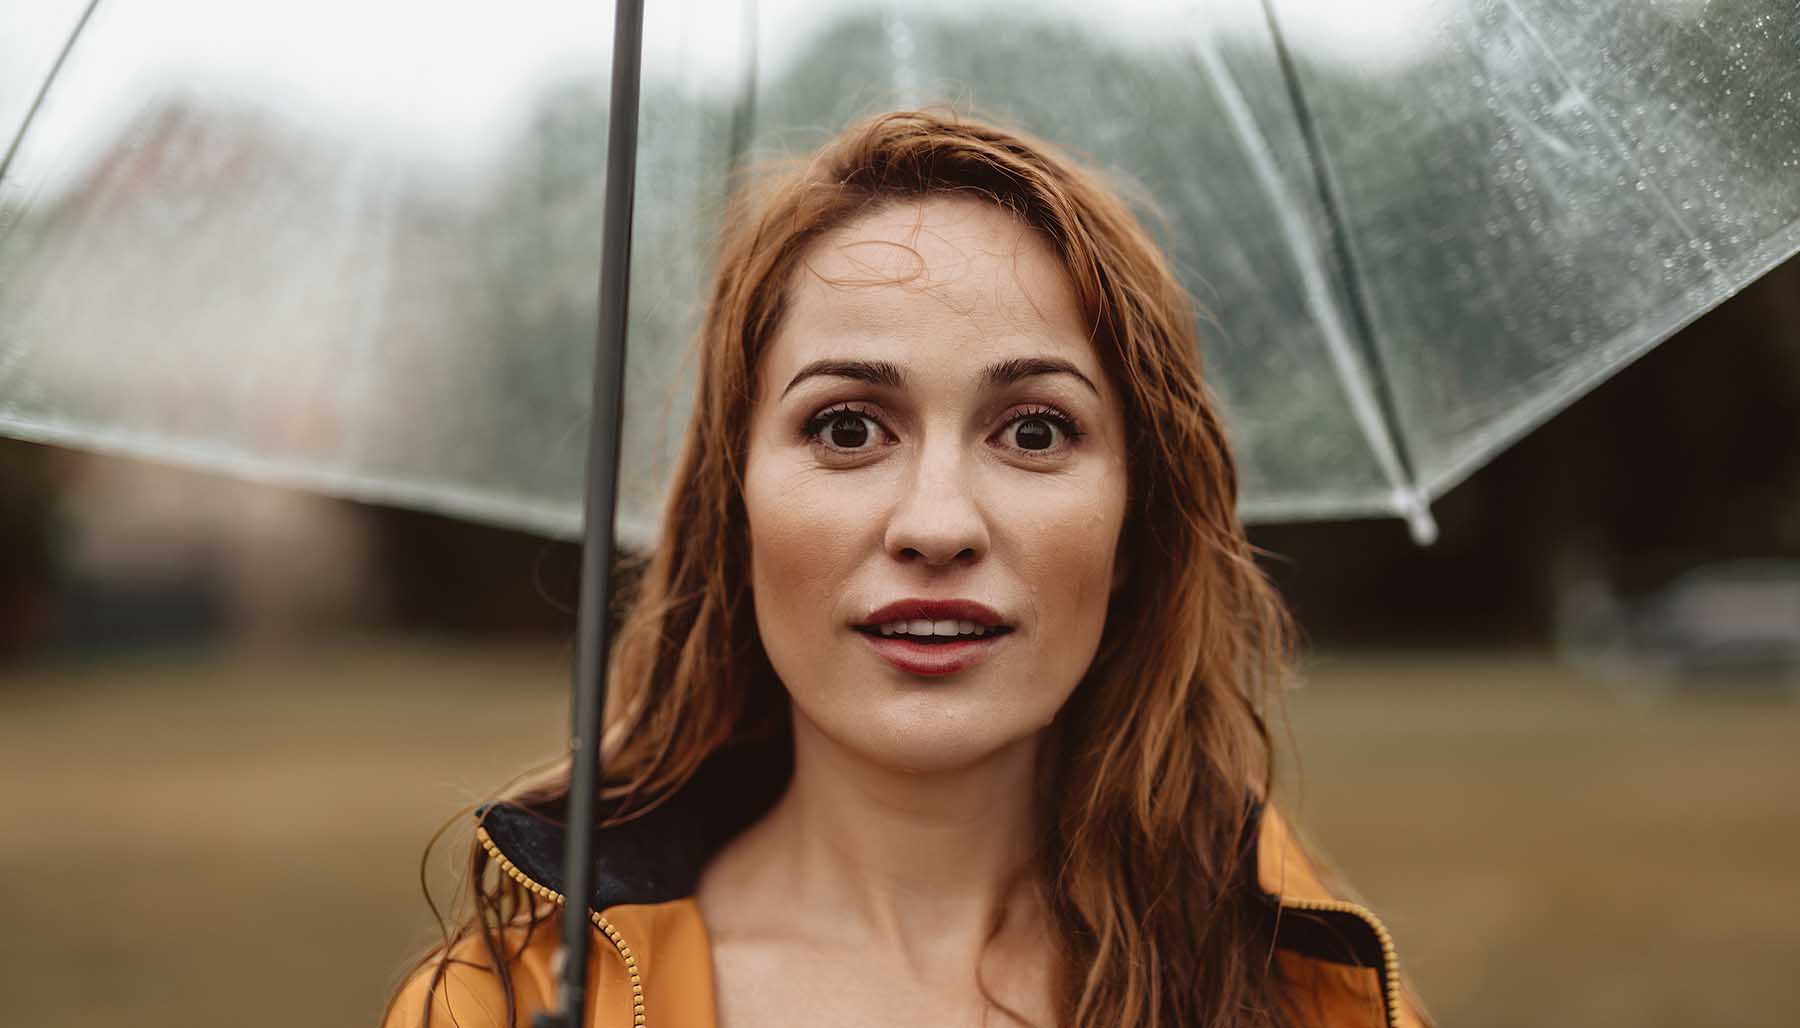 A redheaded woman standing in the rain under an umbrella